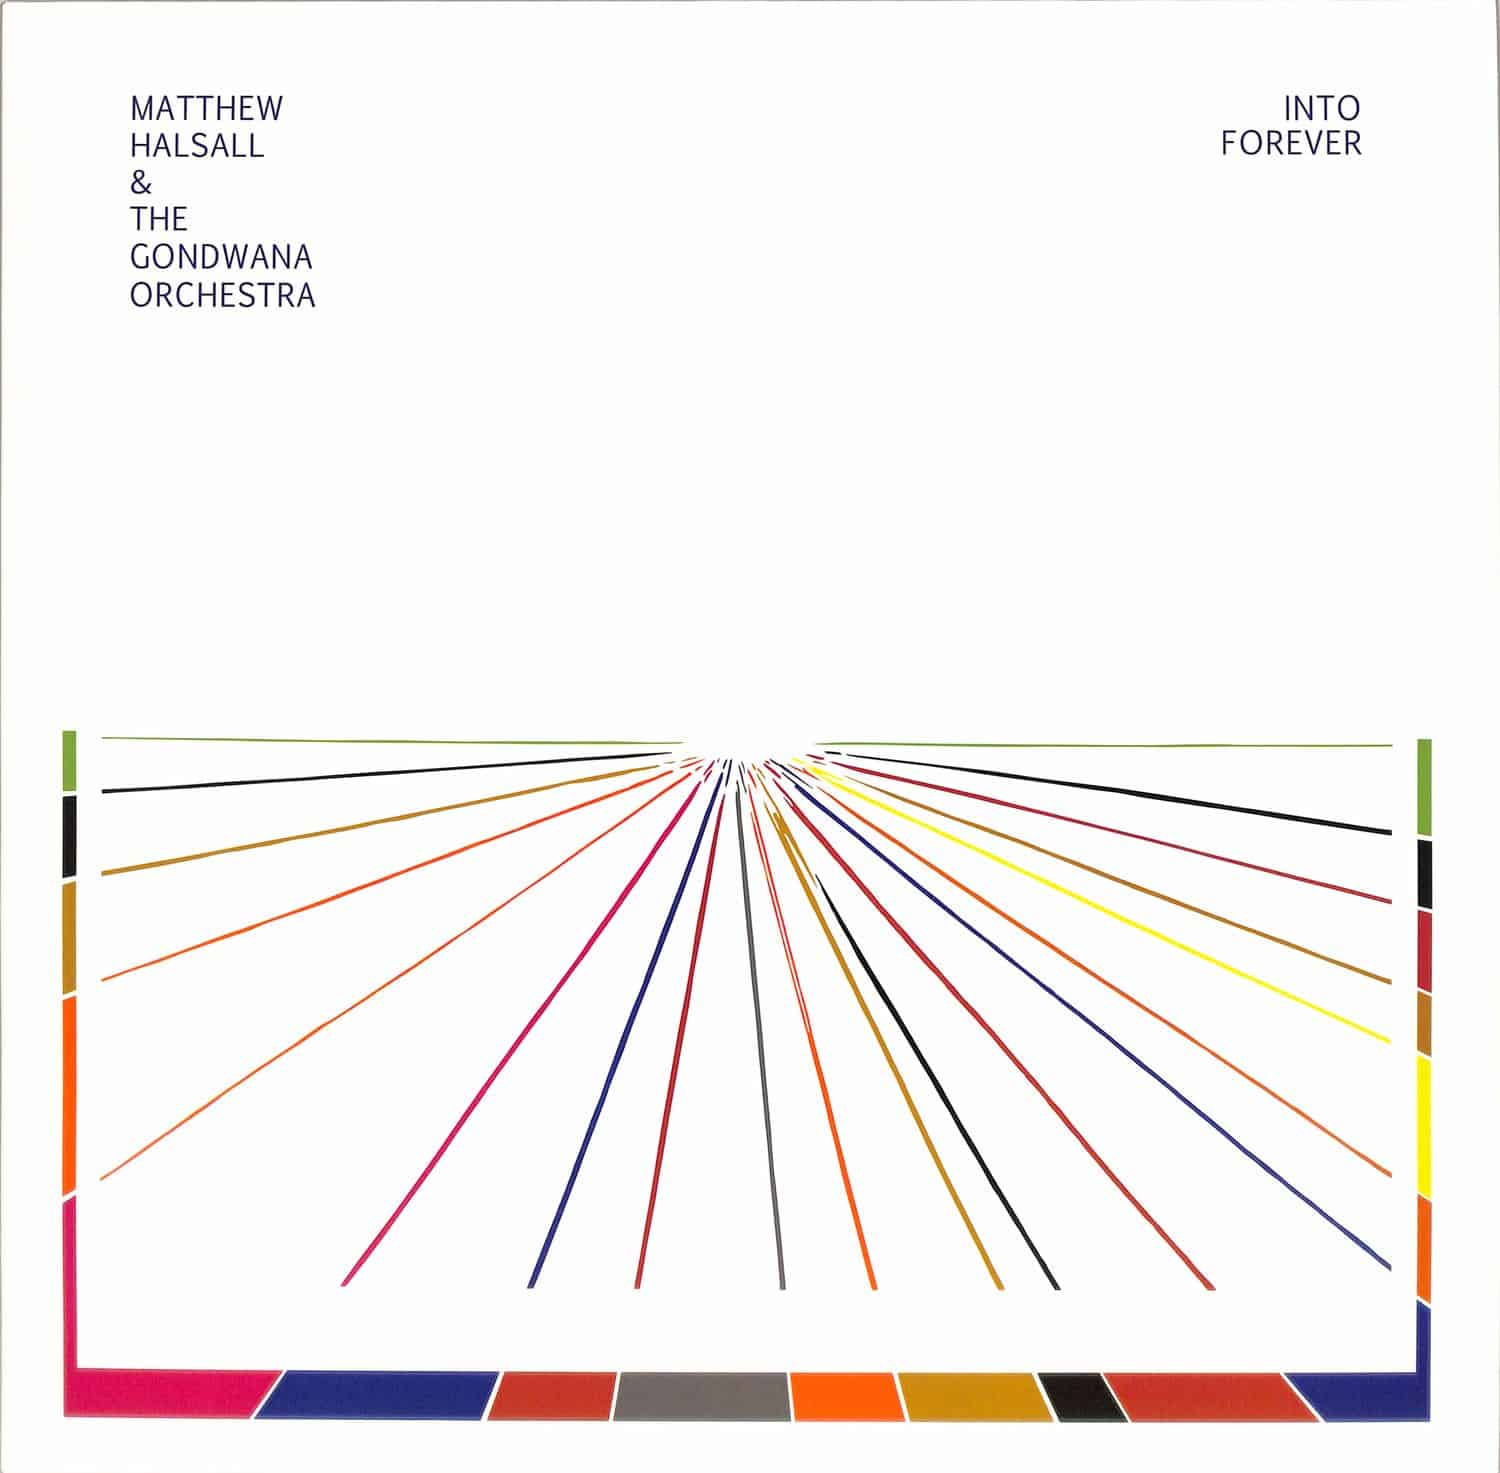 Matthew Halsall & The Gondwana Orchestra - INTO FOREVER